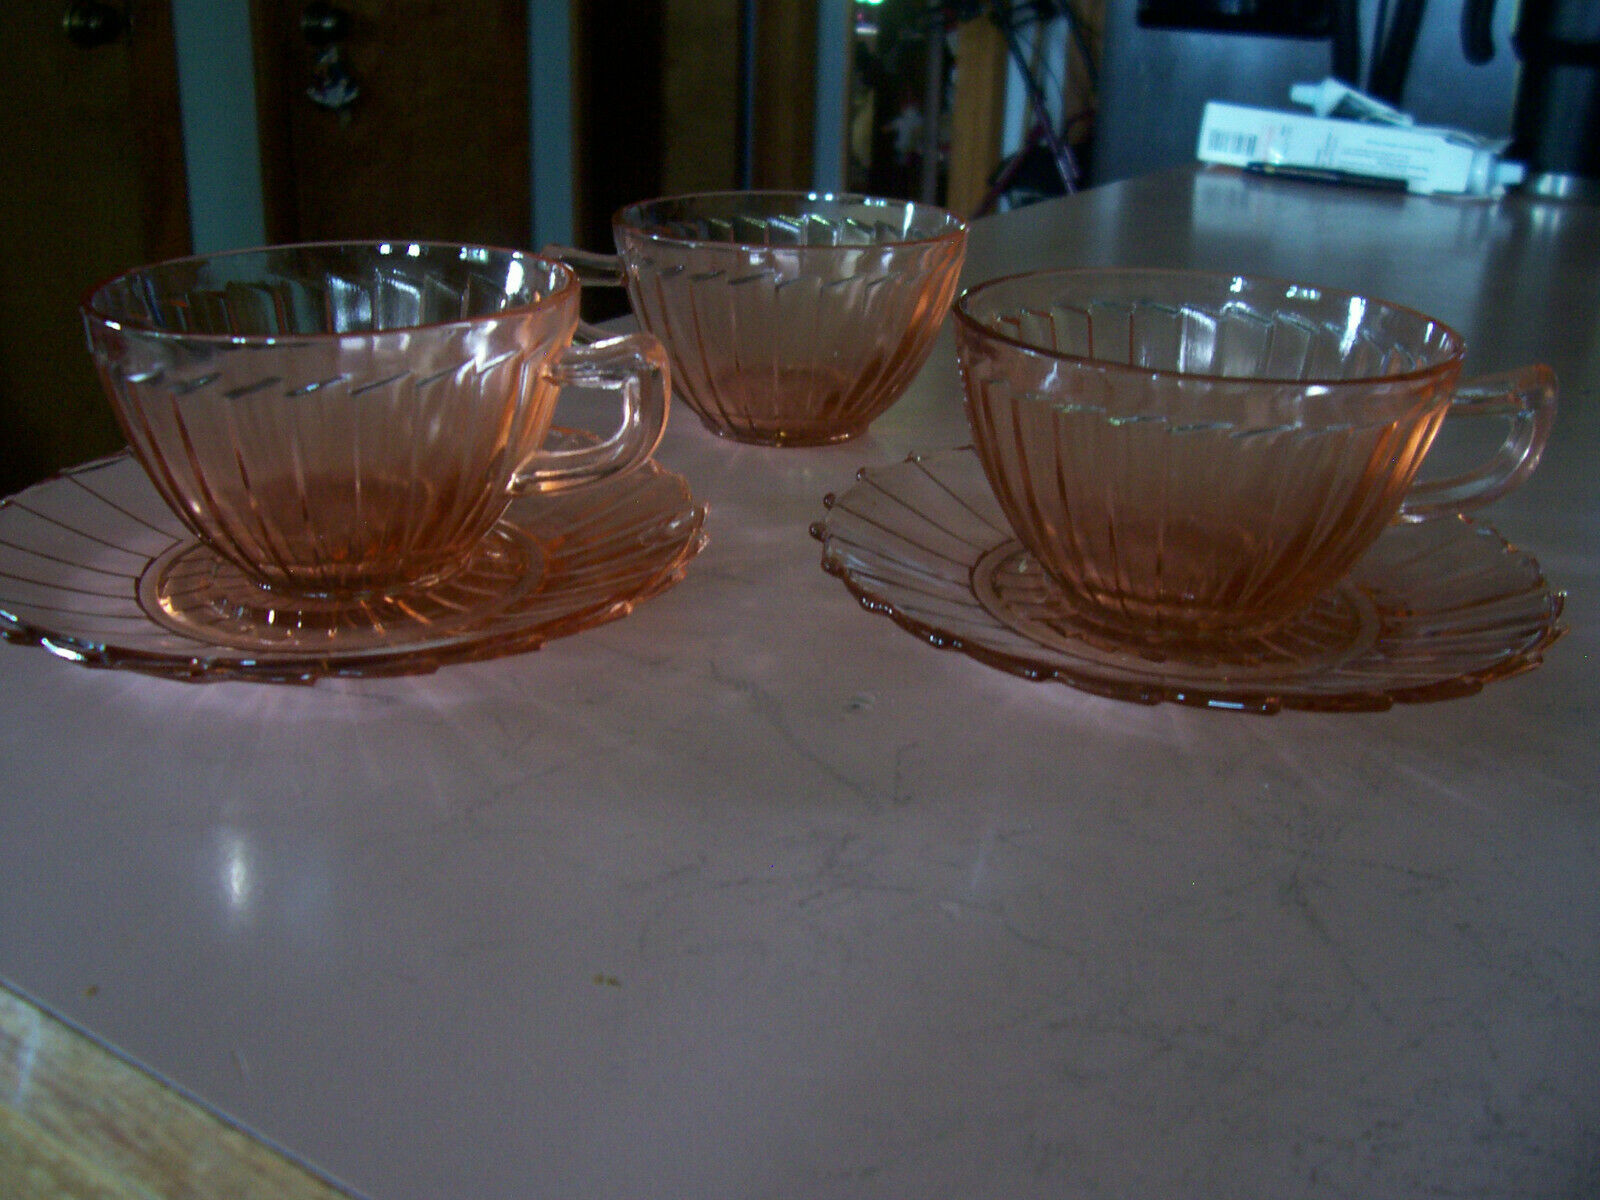 Sierra Pinwheel Pink Cups And Saucers (2 Sets Plus A Cup)